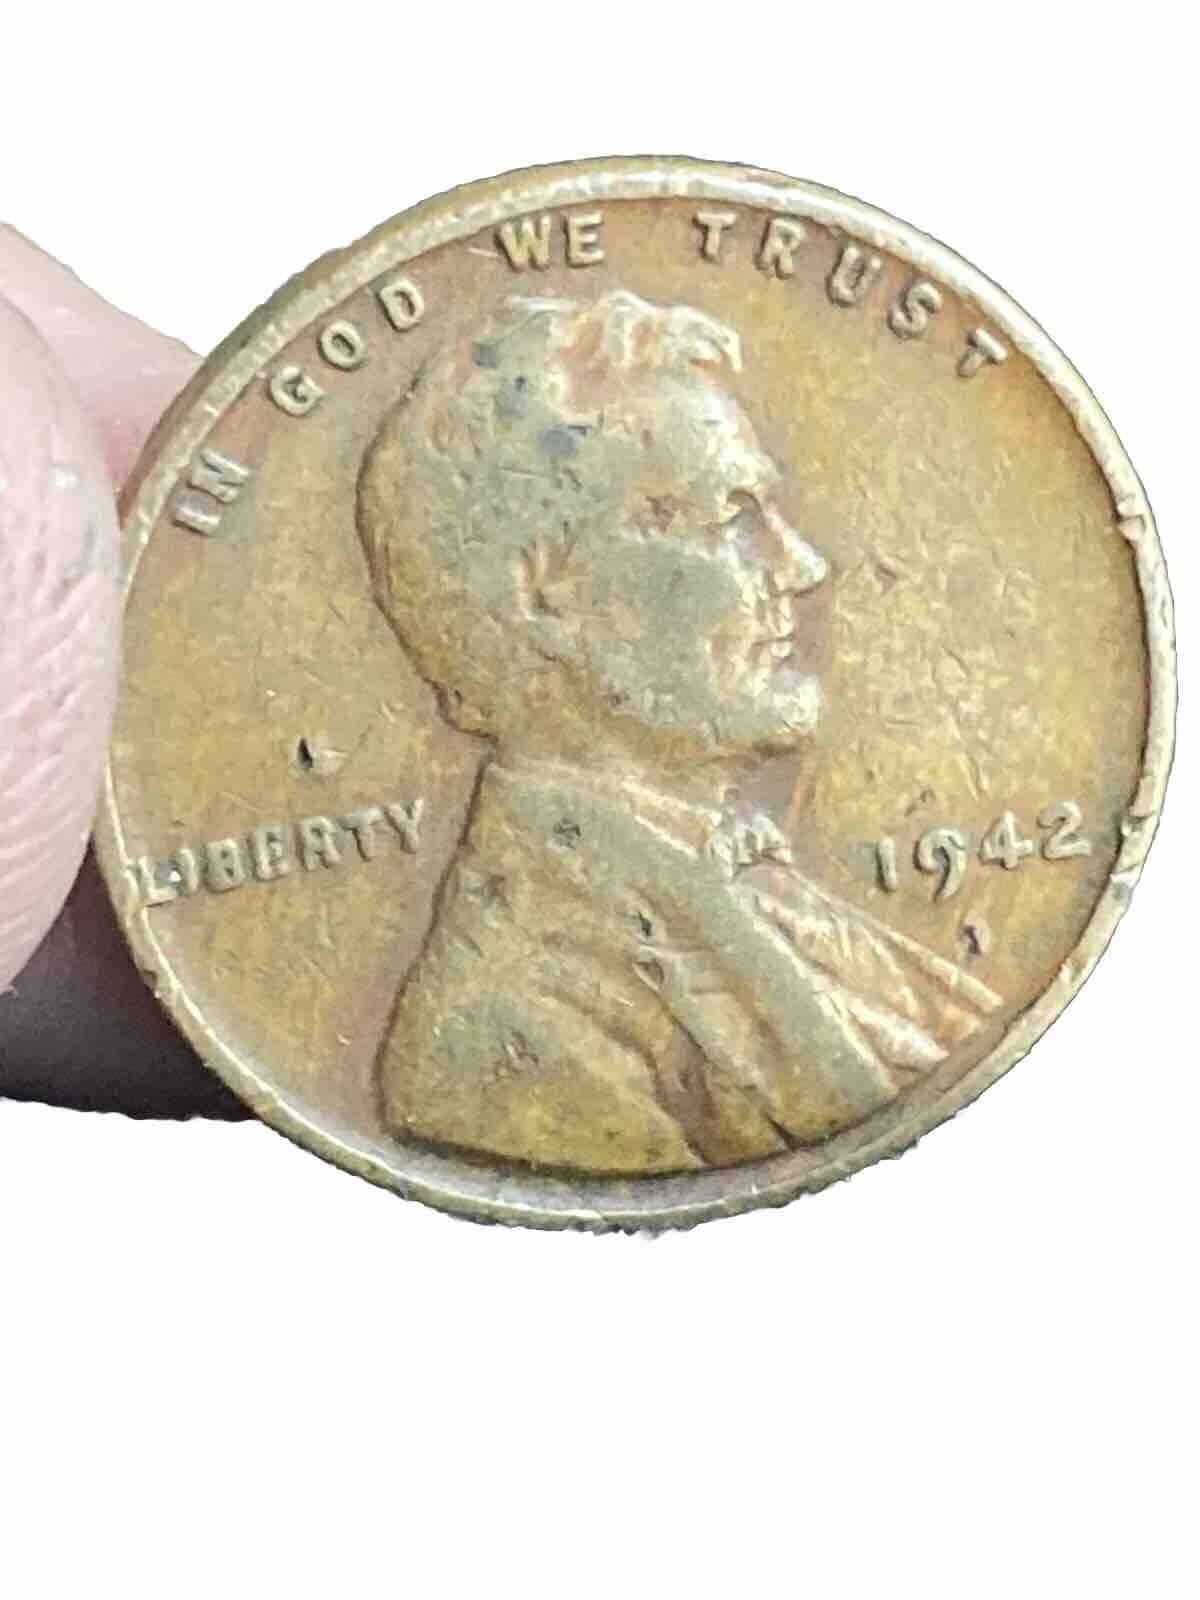 1942 Wheat Penny: No Mint Mark, Rare Error in liberty . Double Die